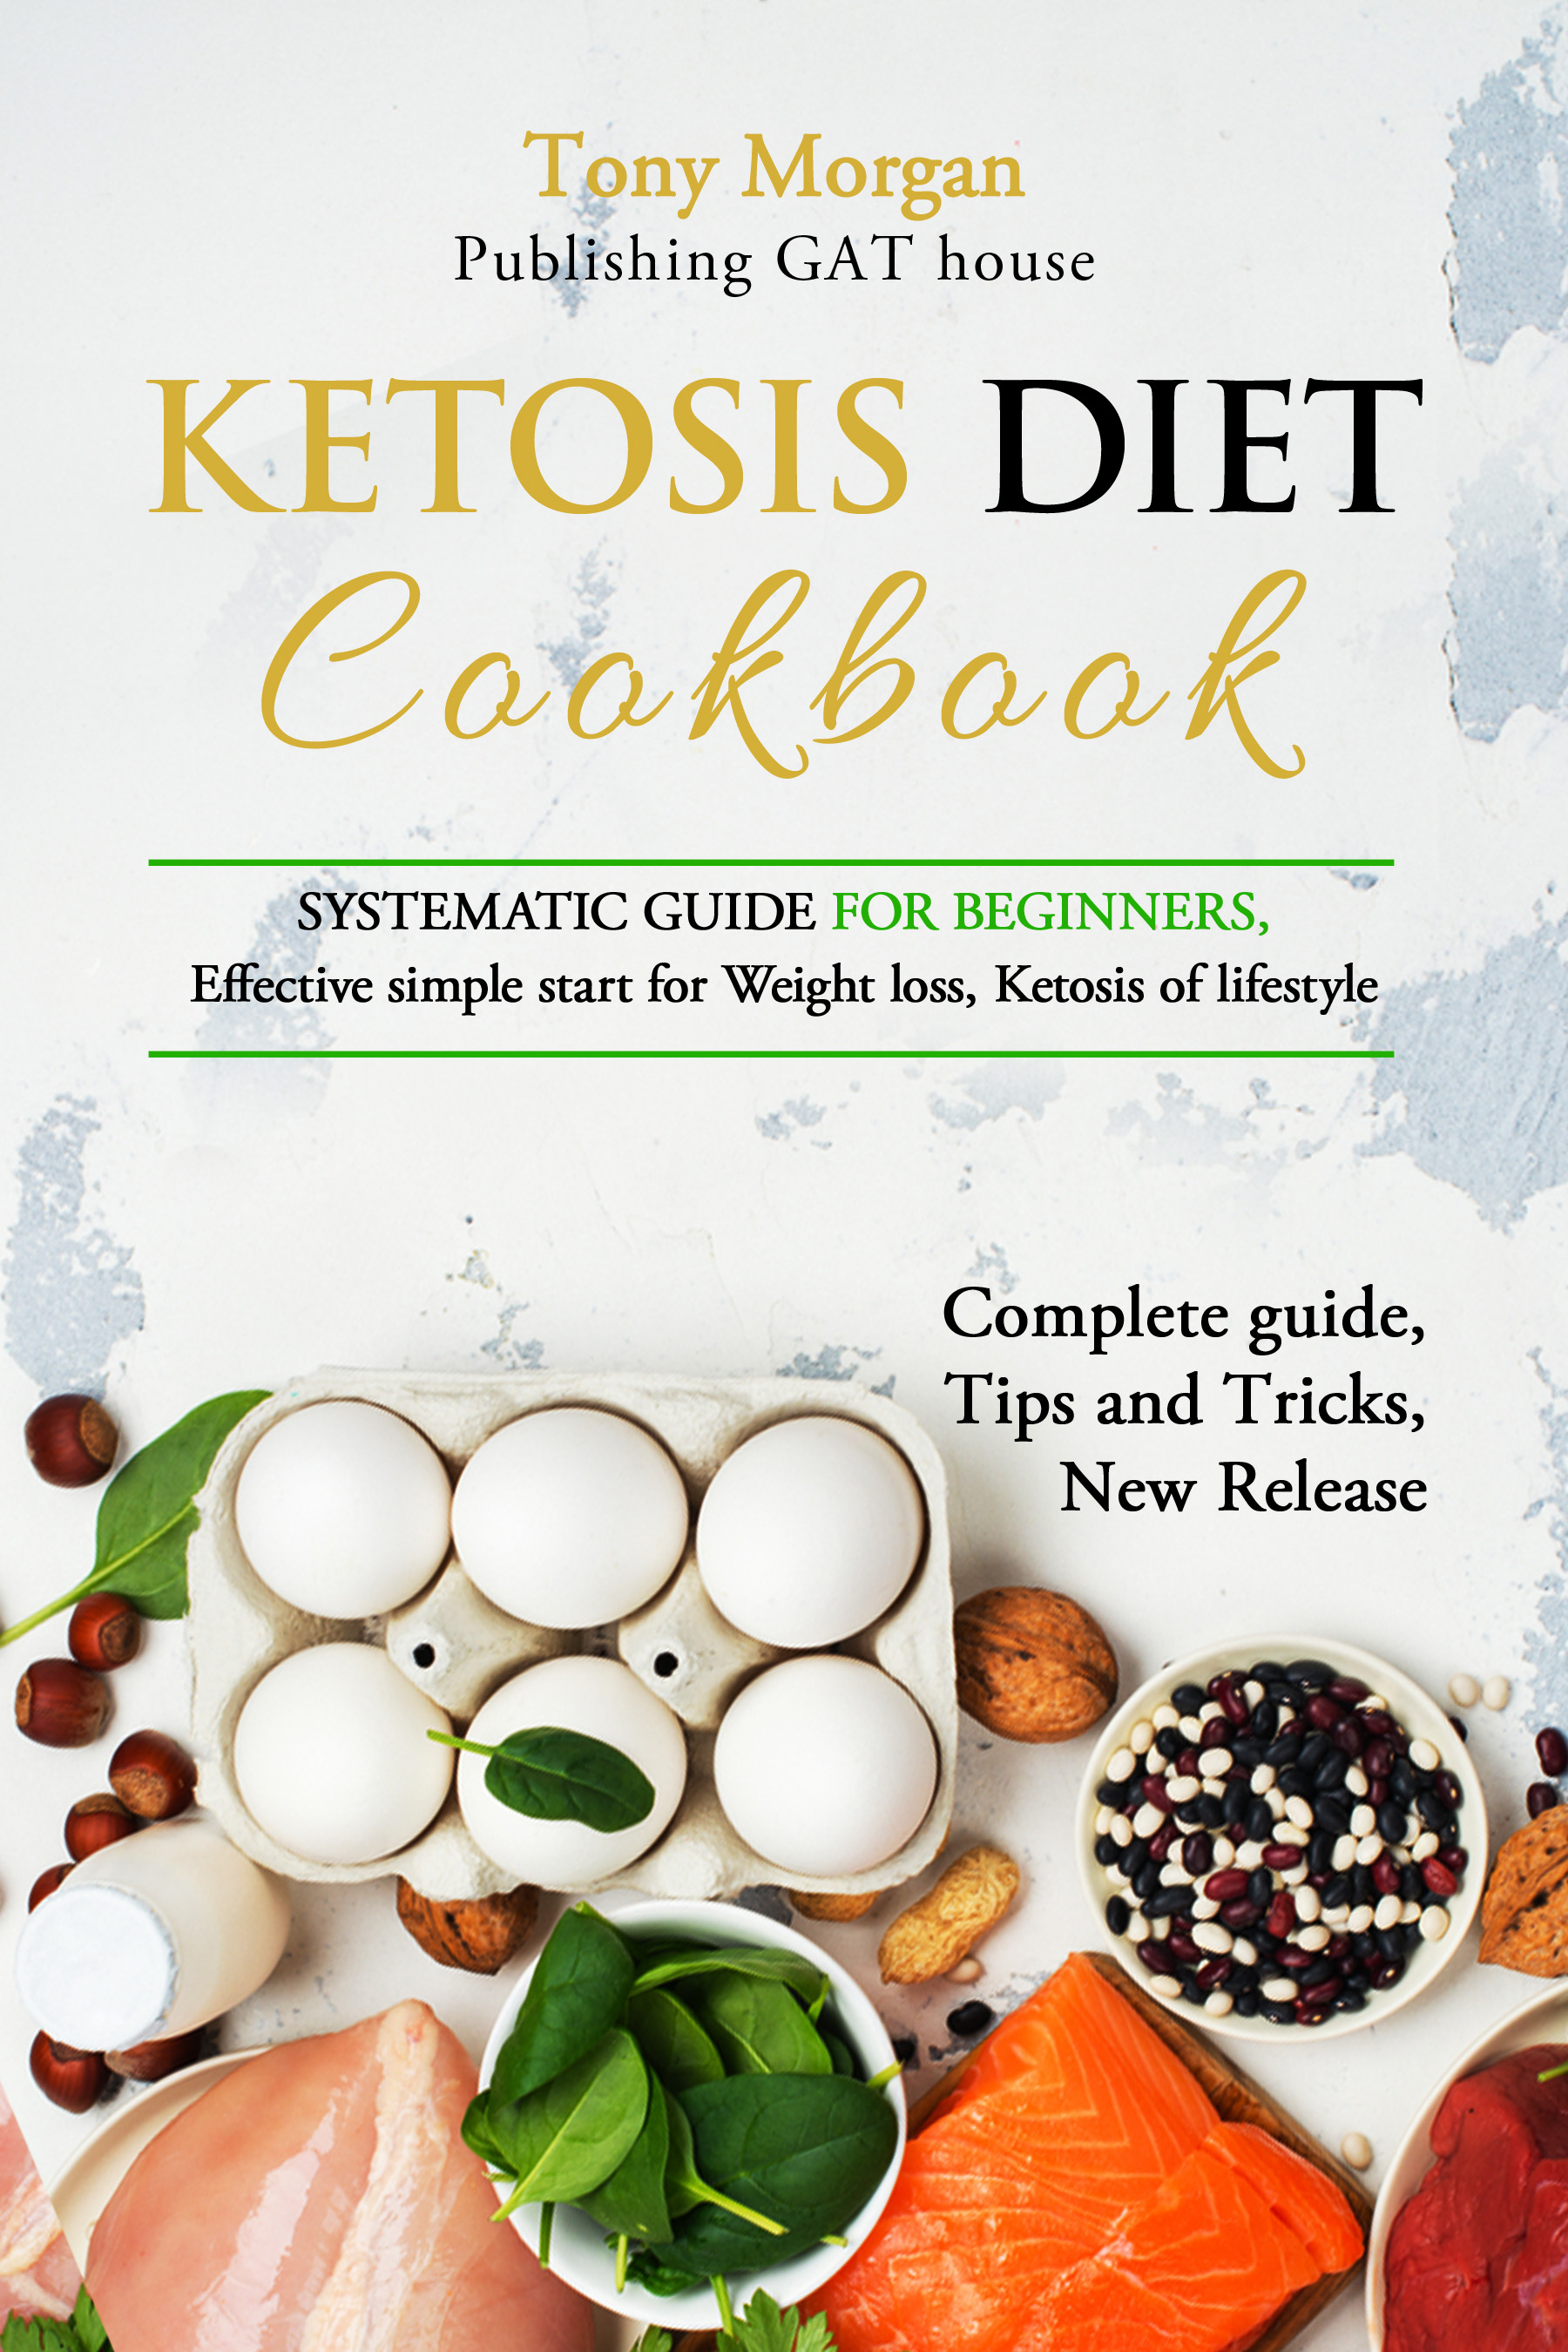 FREE: KETOSIS diet COOKBOOK: SYSTEMATIC GUIDE FOR BEGINNERS, effective simple start for weight loss, ketosis of lifestyle, Full guide, tips and tricks by Tony Morgan